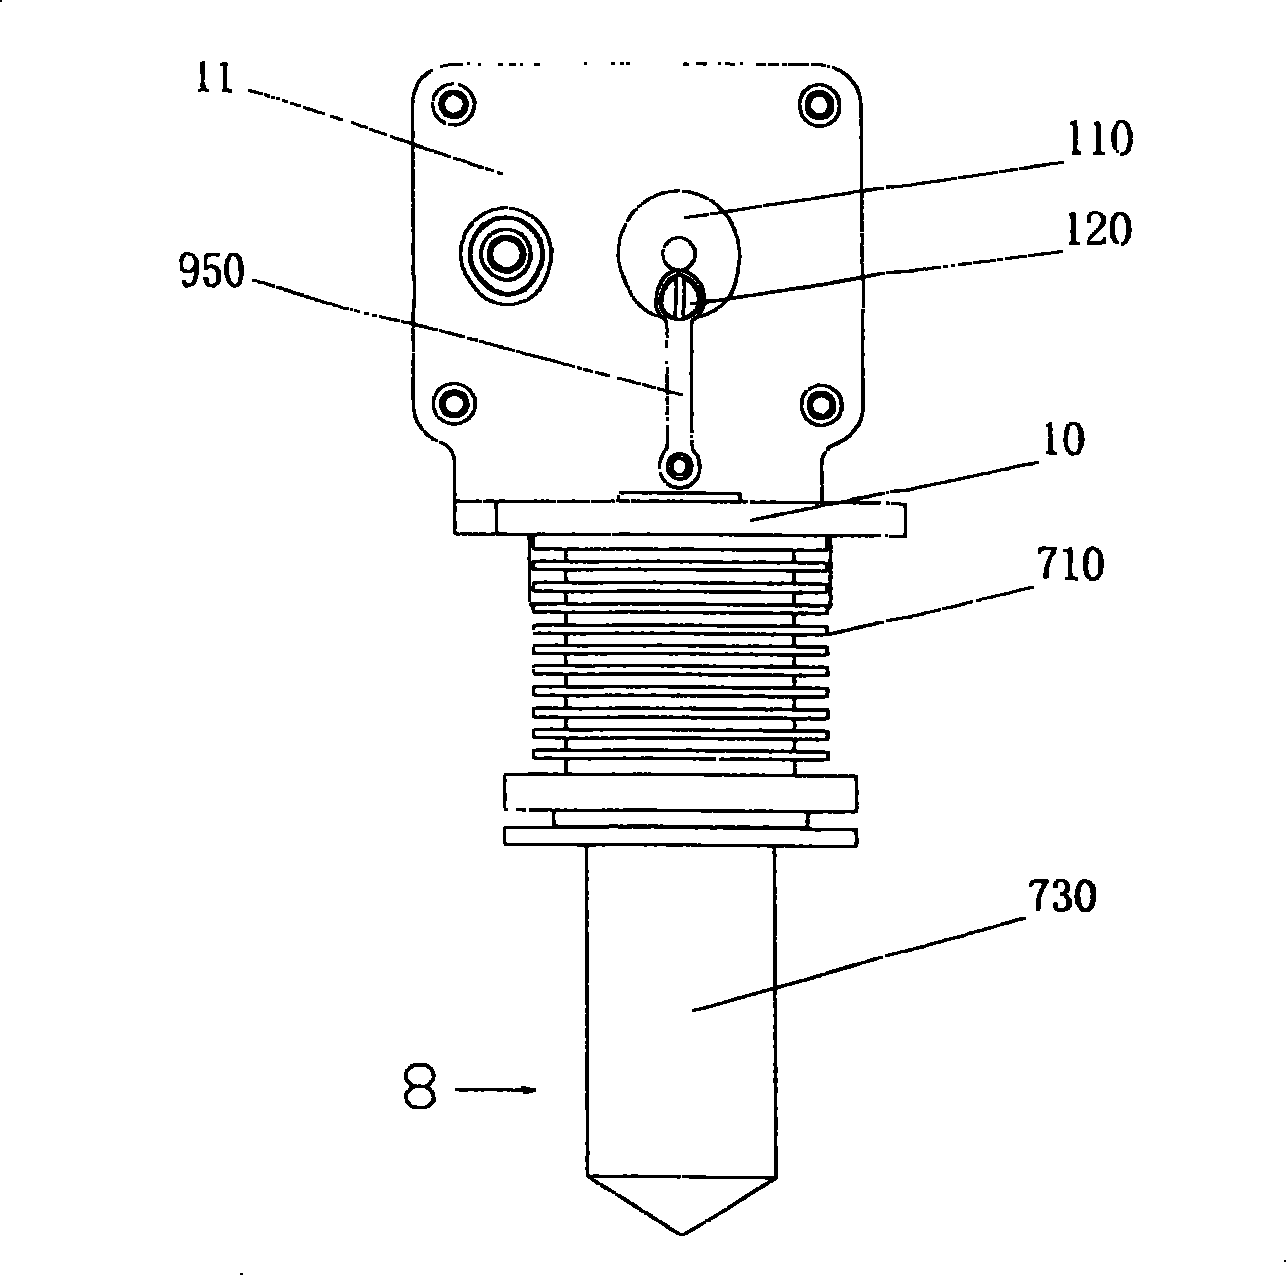 Small-sized hot air engine